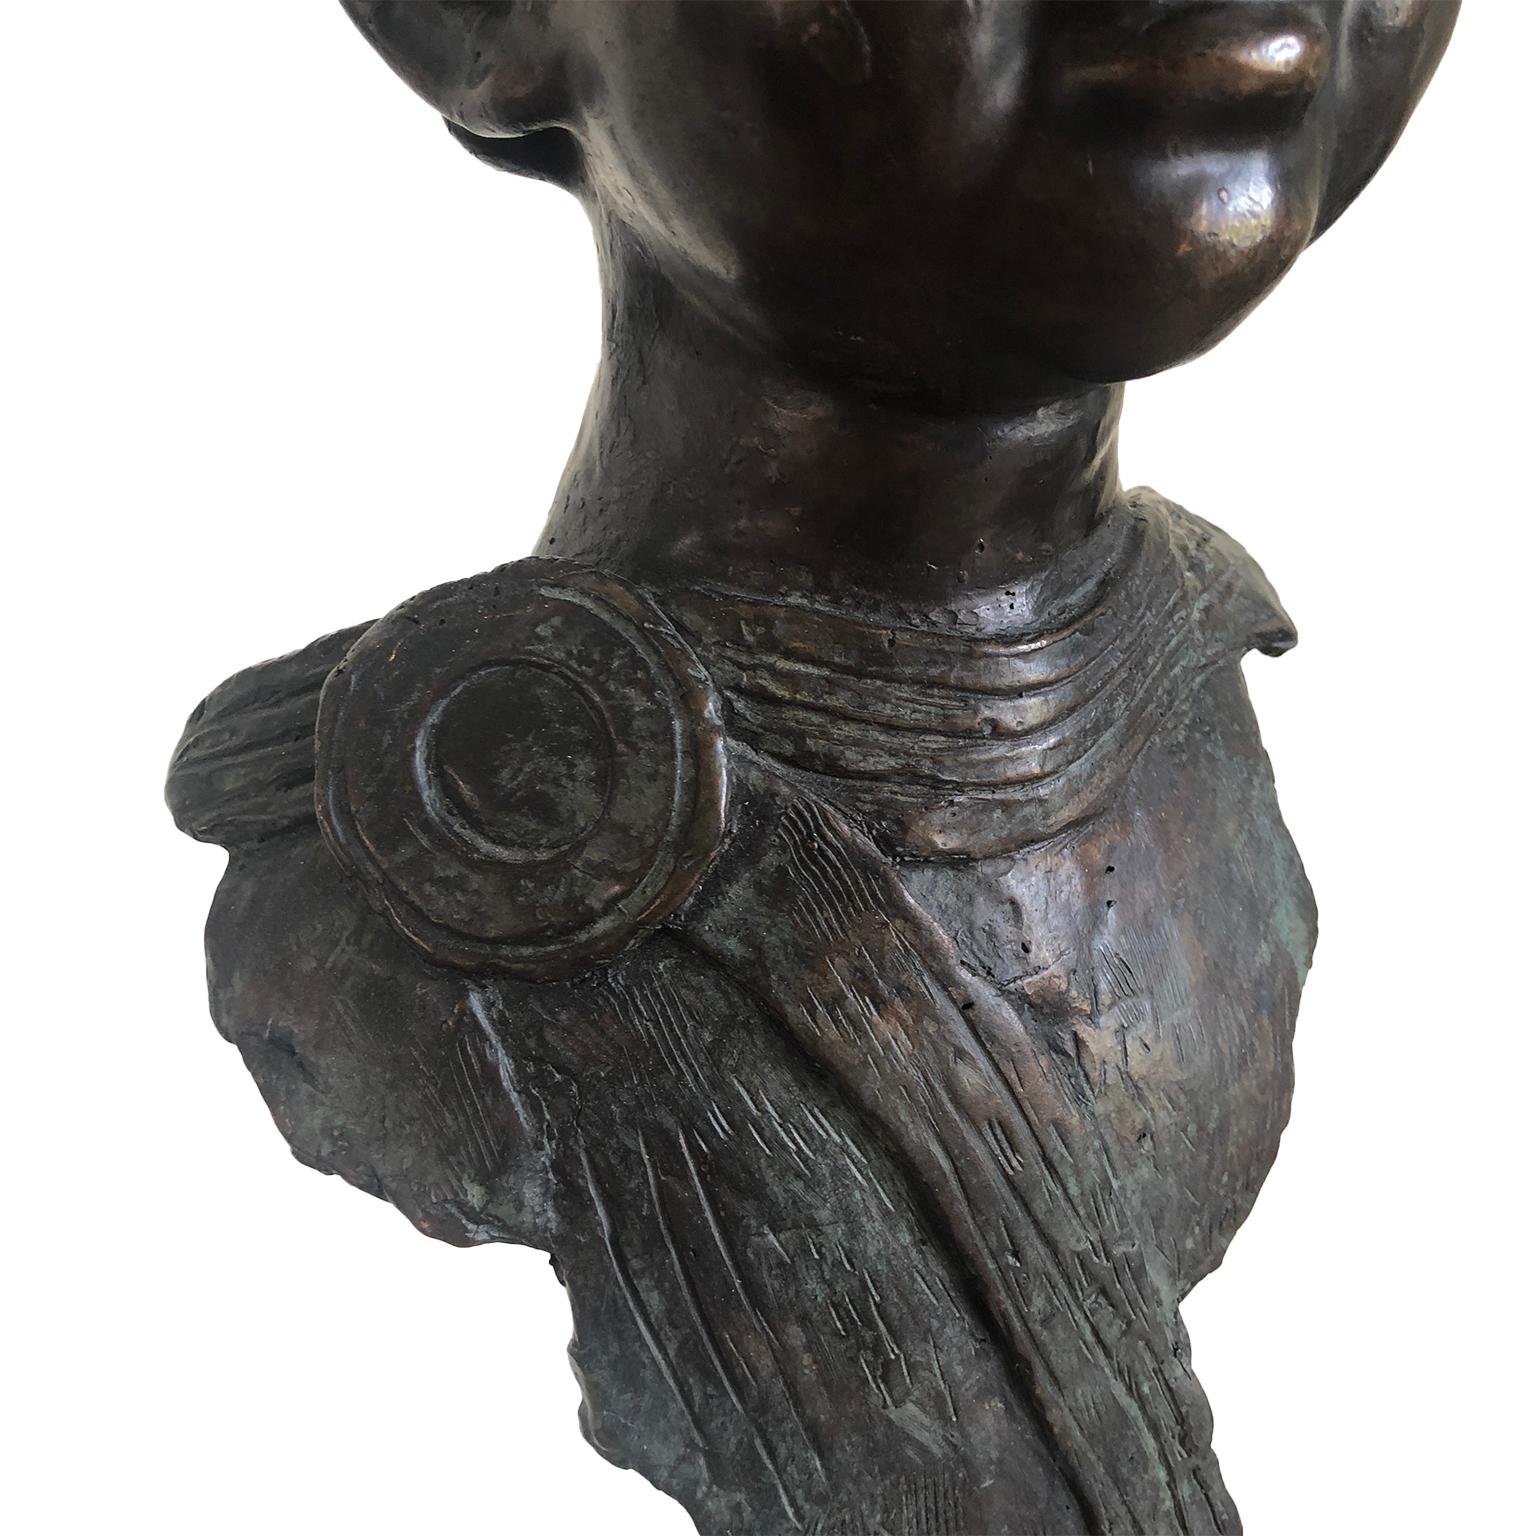 Figurative Bronze Contemporary Sculpture: IL Giovane Cesare  Godfried Dols

Dols was born in 1958. Godfried developed himself from his 18th until his 30th as an self-taught ceramist and potter. A period of twenty years followed, in which creating